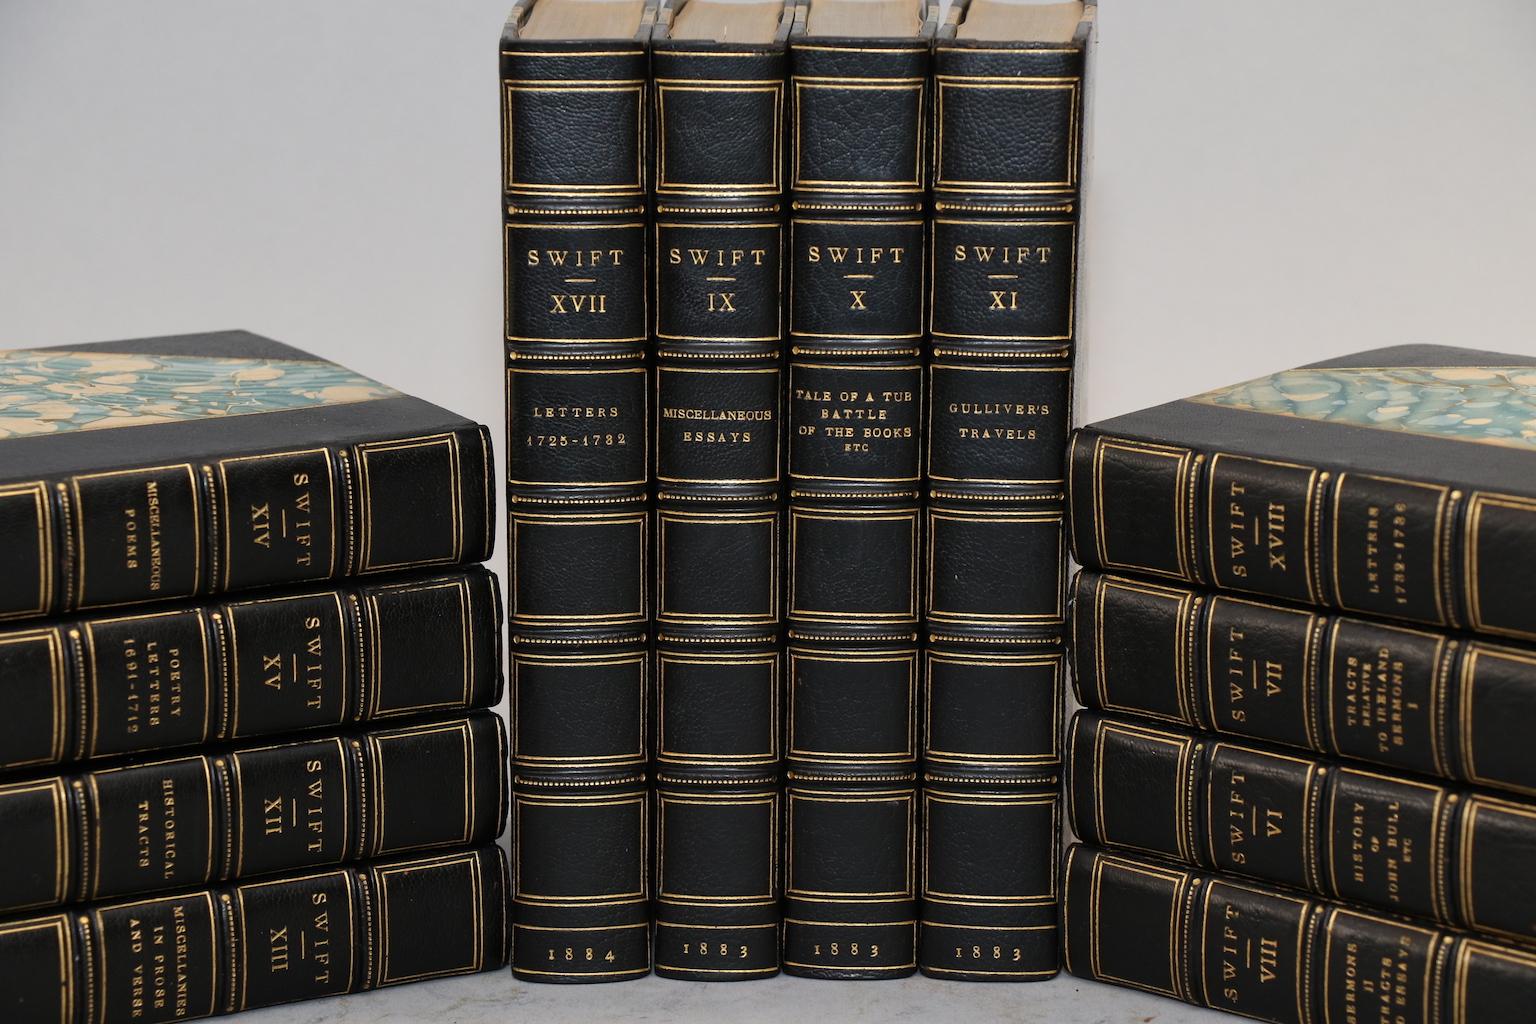 Notes and a Life of the Author by Sir. Walter Scott

Second Edition

Nineteen volumes. Octavo. Limited to seven hundred and fifty copies, this is #330. Bound in three-quarter green morocco with marbled boards, top edges gilt, and raised bands.